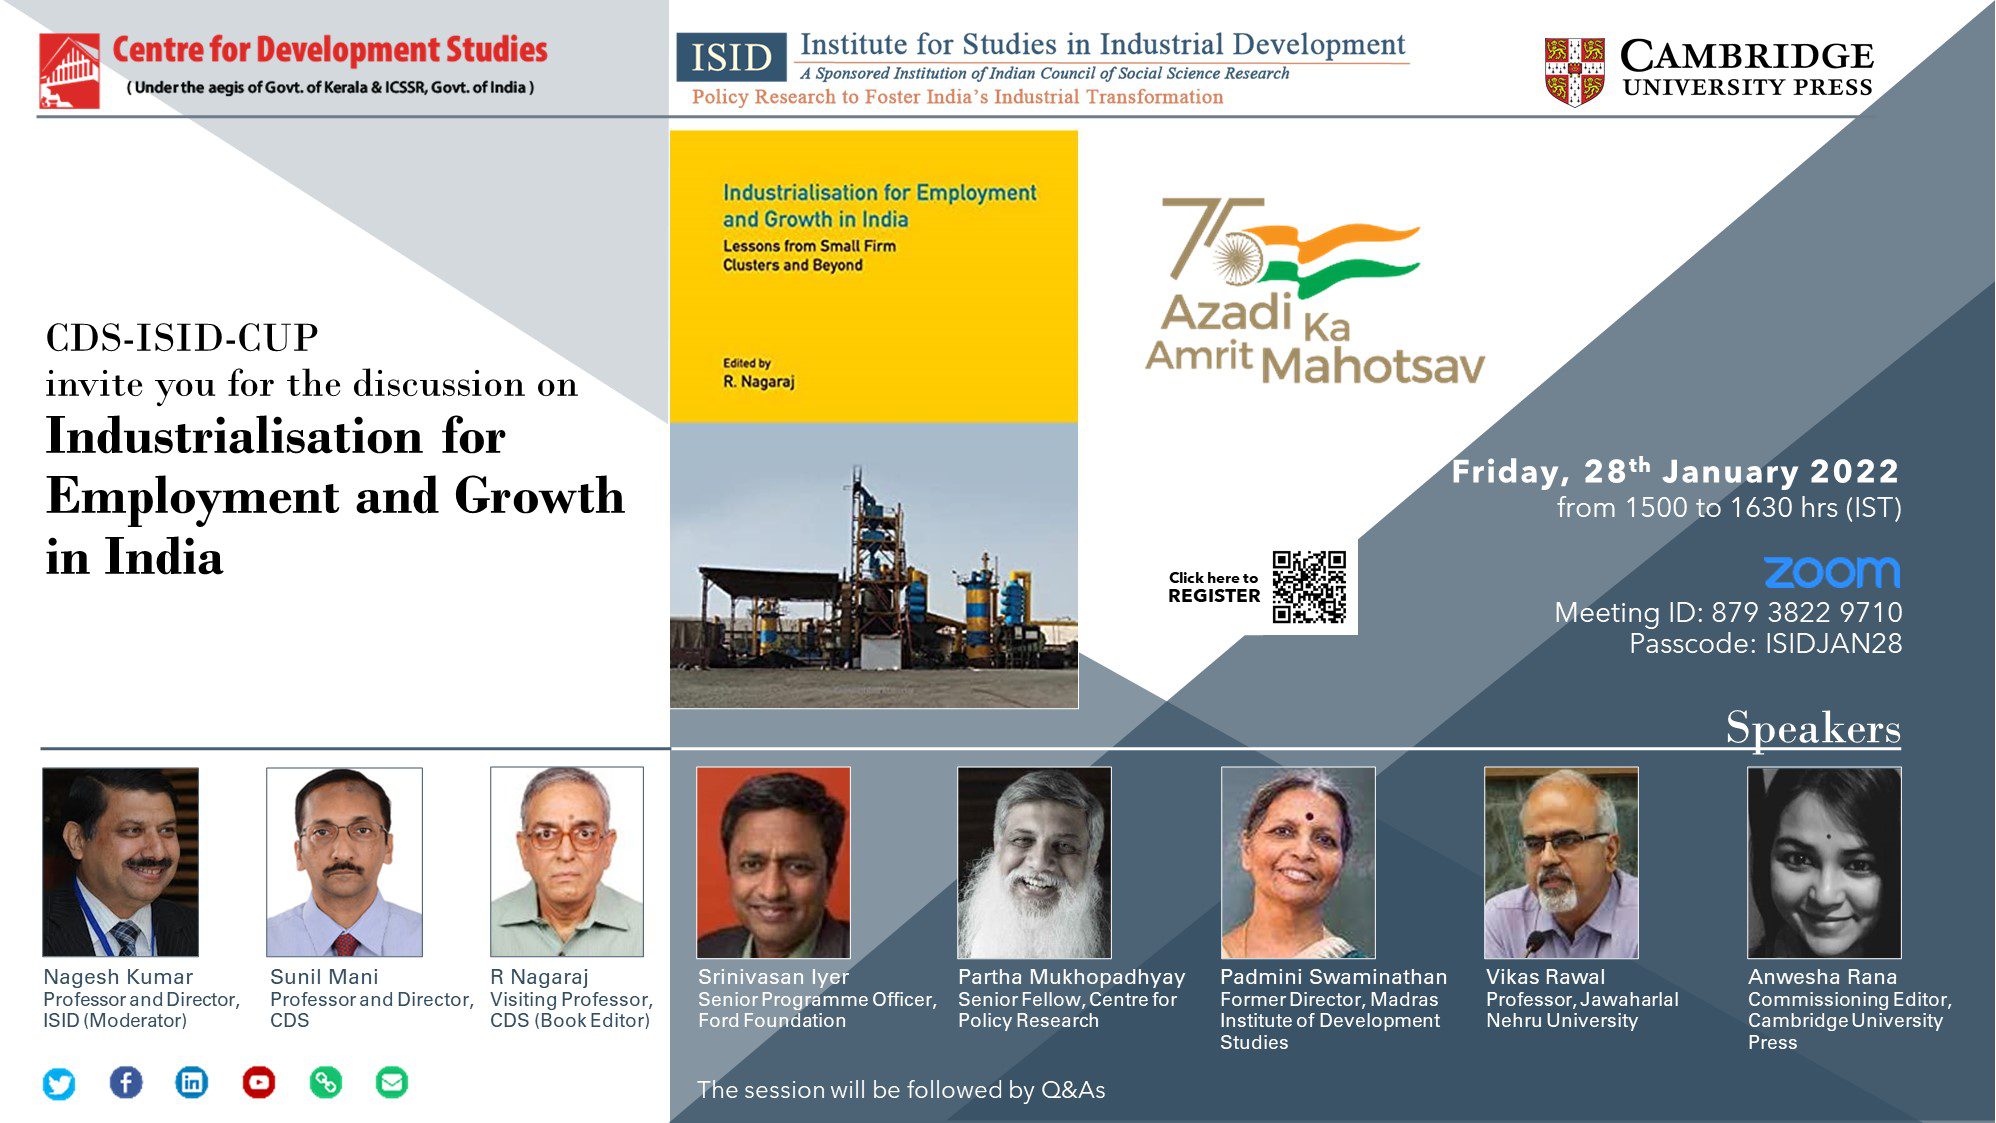 Industrialisation for Employment and Growth in India